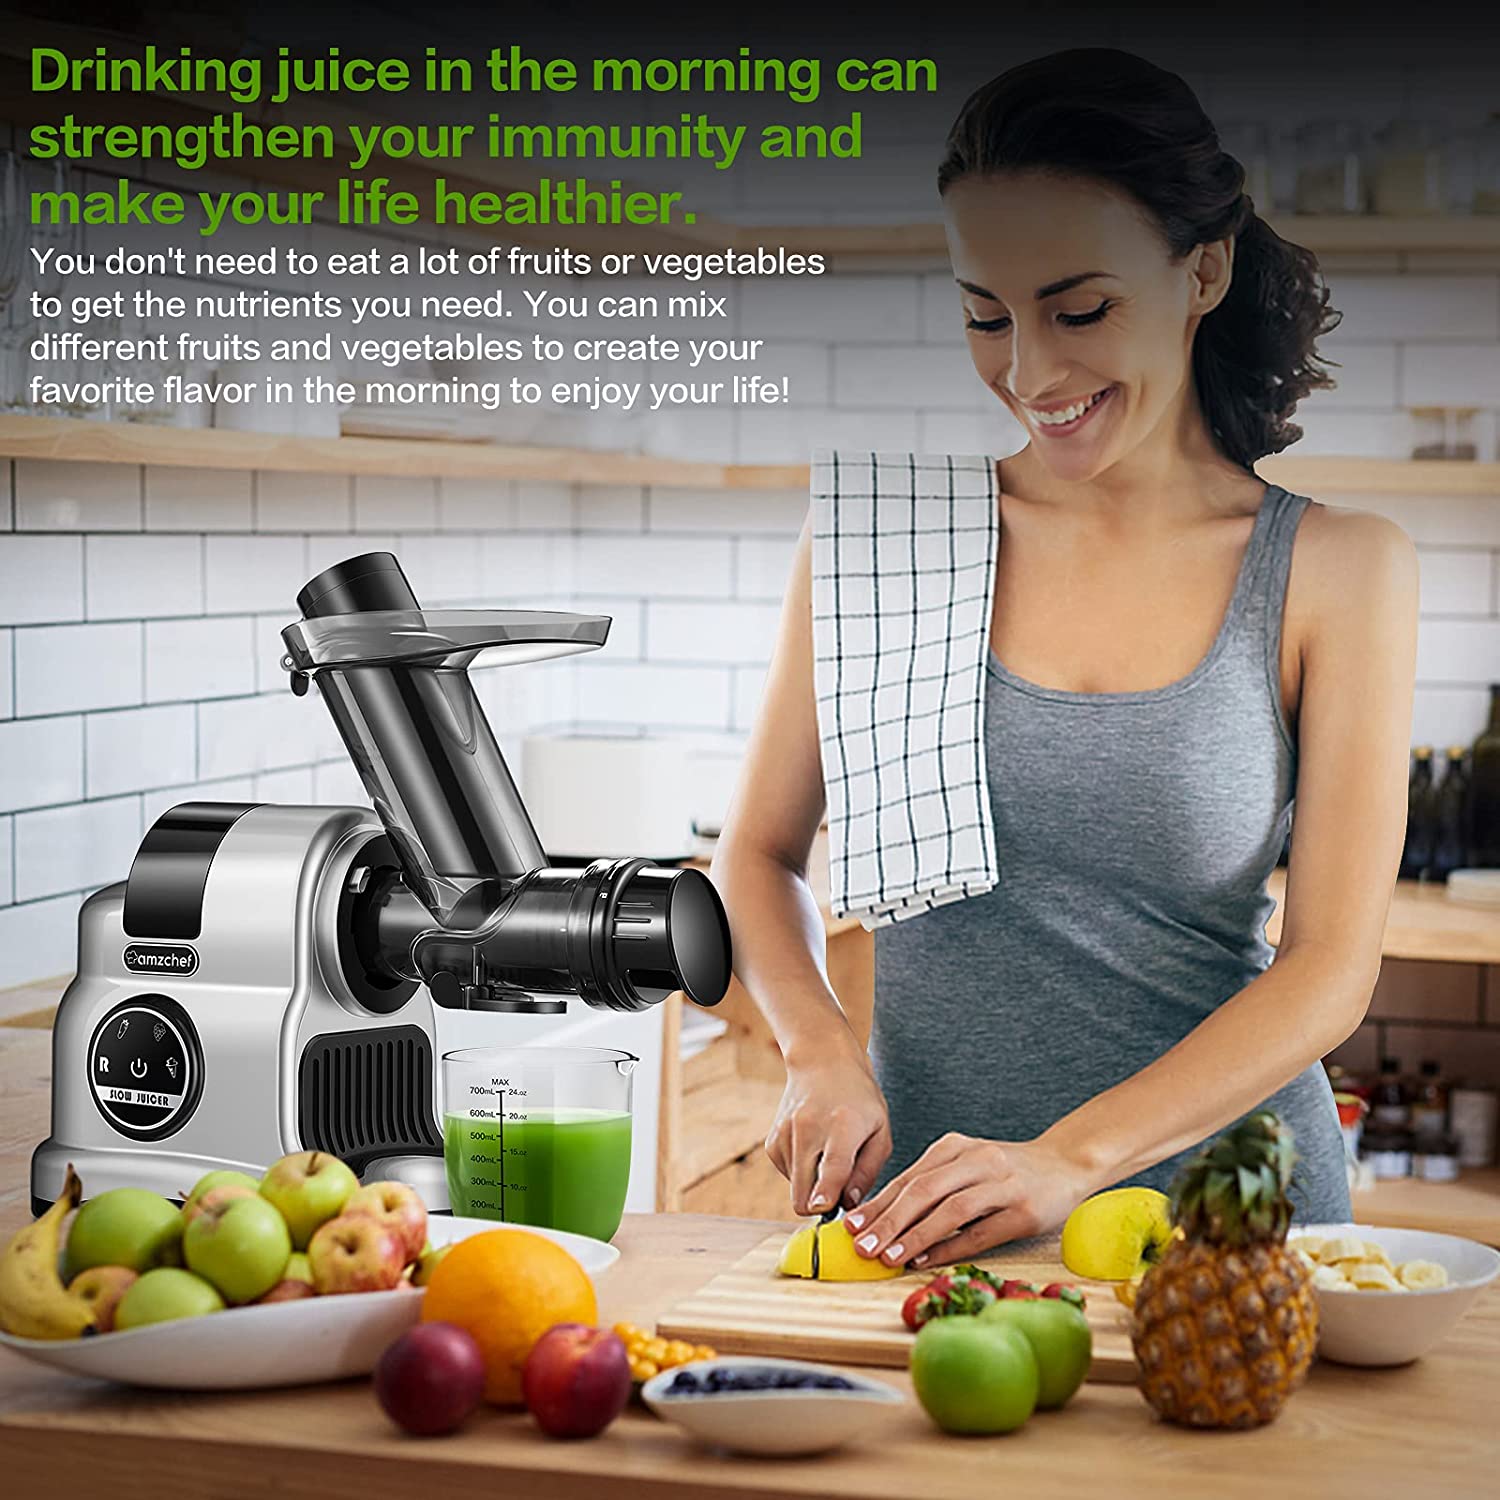 Juicer Machines, AMZCHEF Innovative Cold Press Juicer with high Juice Yield, Slow Masticating Juicer for Vegetables and Fruits,Juice Extractor with Reverse, Slow Juicer, Easy to Clean, Operate Quiet